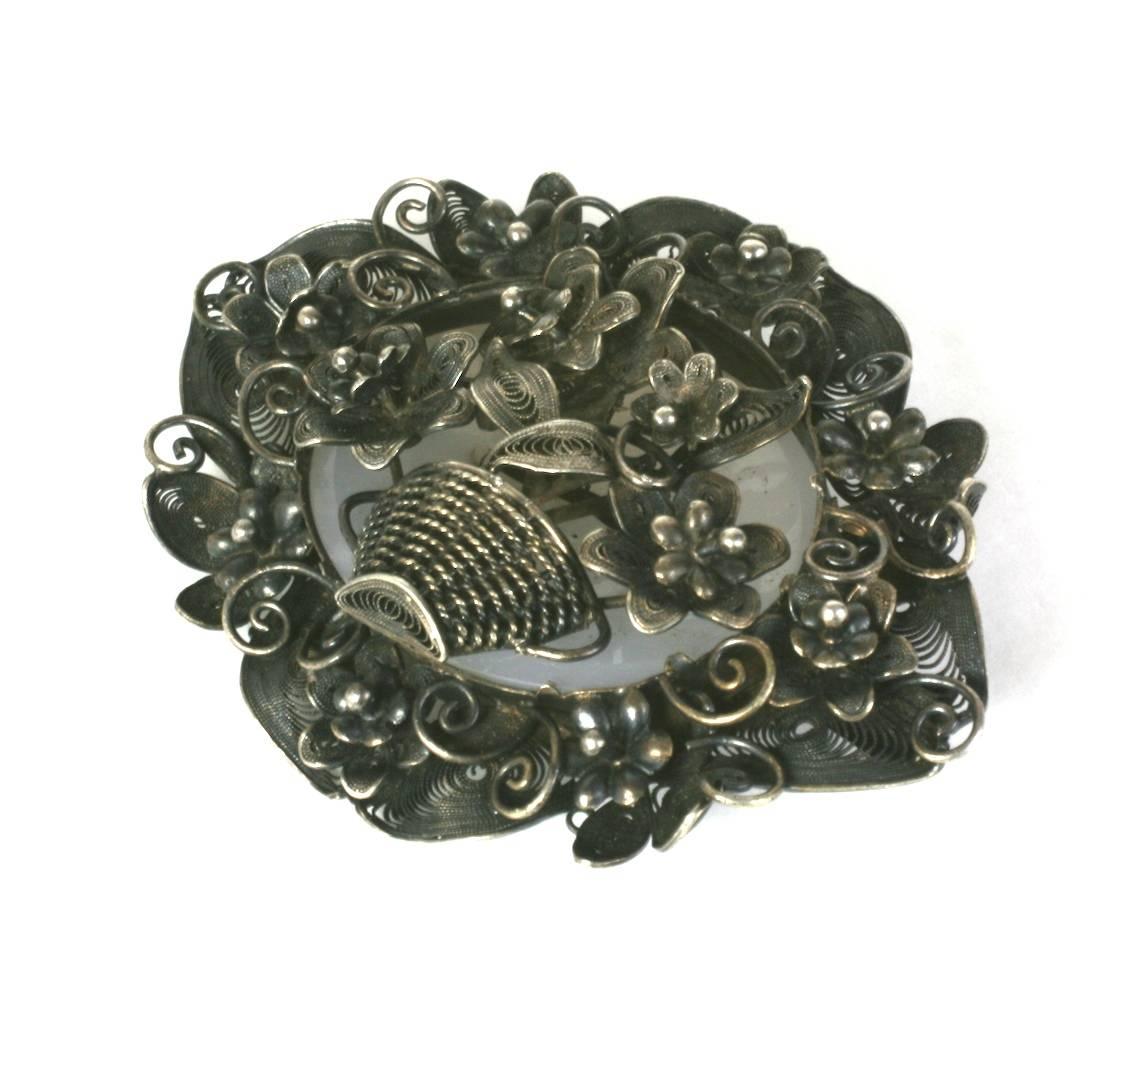 Large Victorian English Sterling silver Filigree Basket Brooch from the late 19th Century. Elaborate wire work forms the central basket motif and the elaborate floral surround. The basket is bolted into a chalcedony oval stone backdrop.  Wonderful